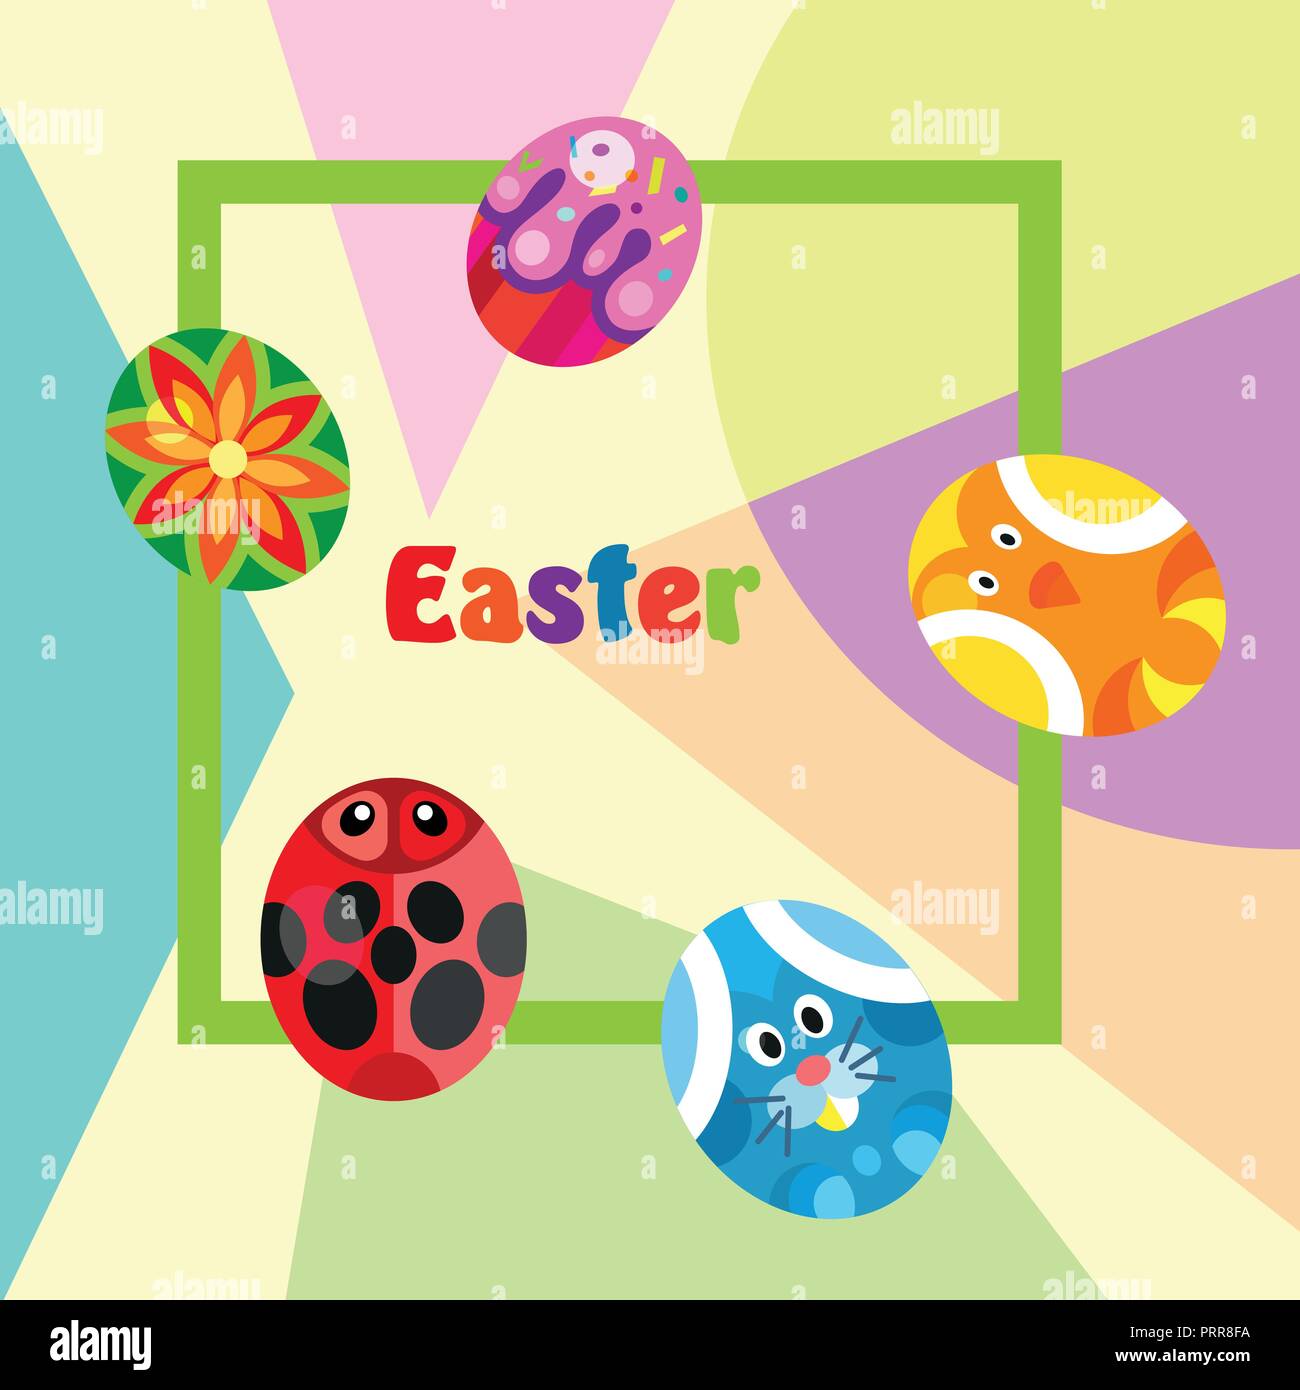 Colorful Happy Easter greeting card with rabbit, bunny, eggs and banners Stock Vector